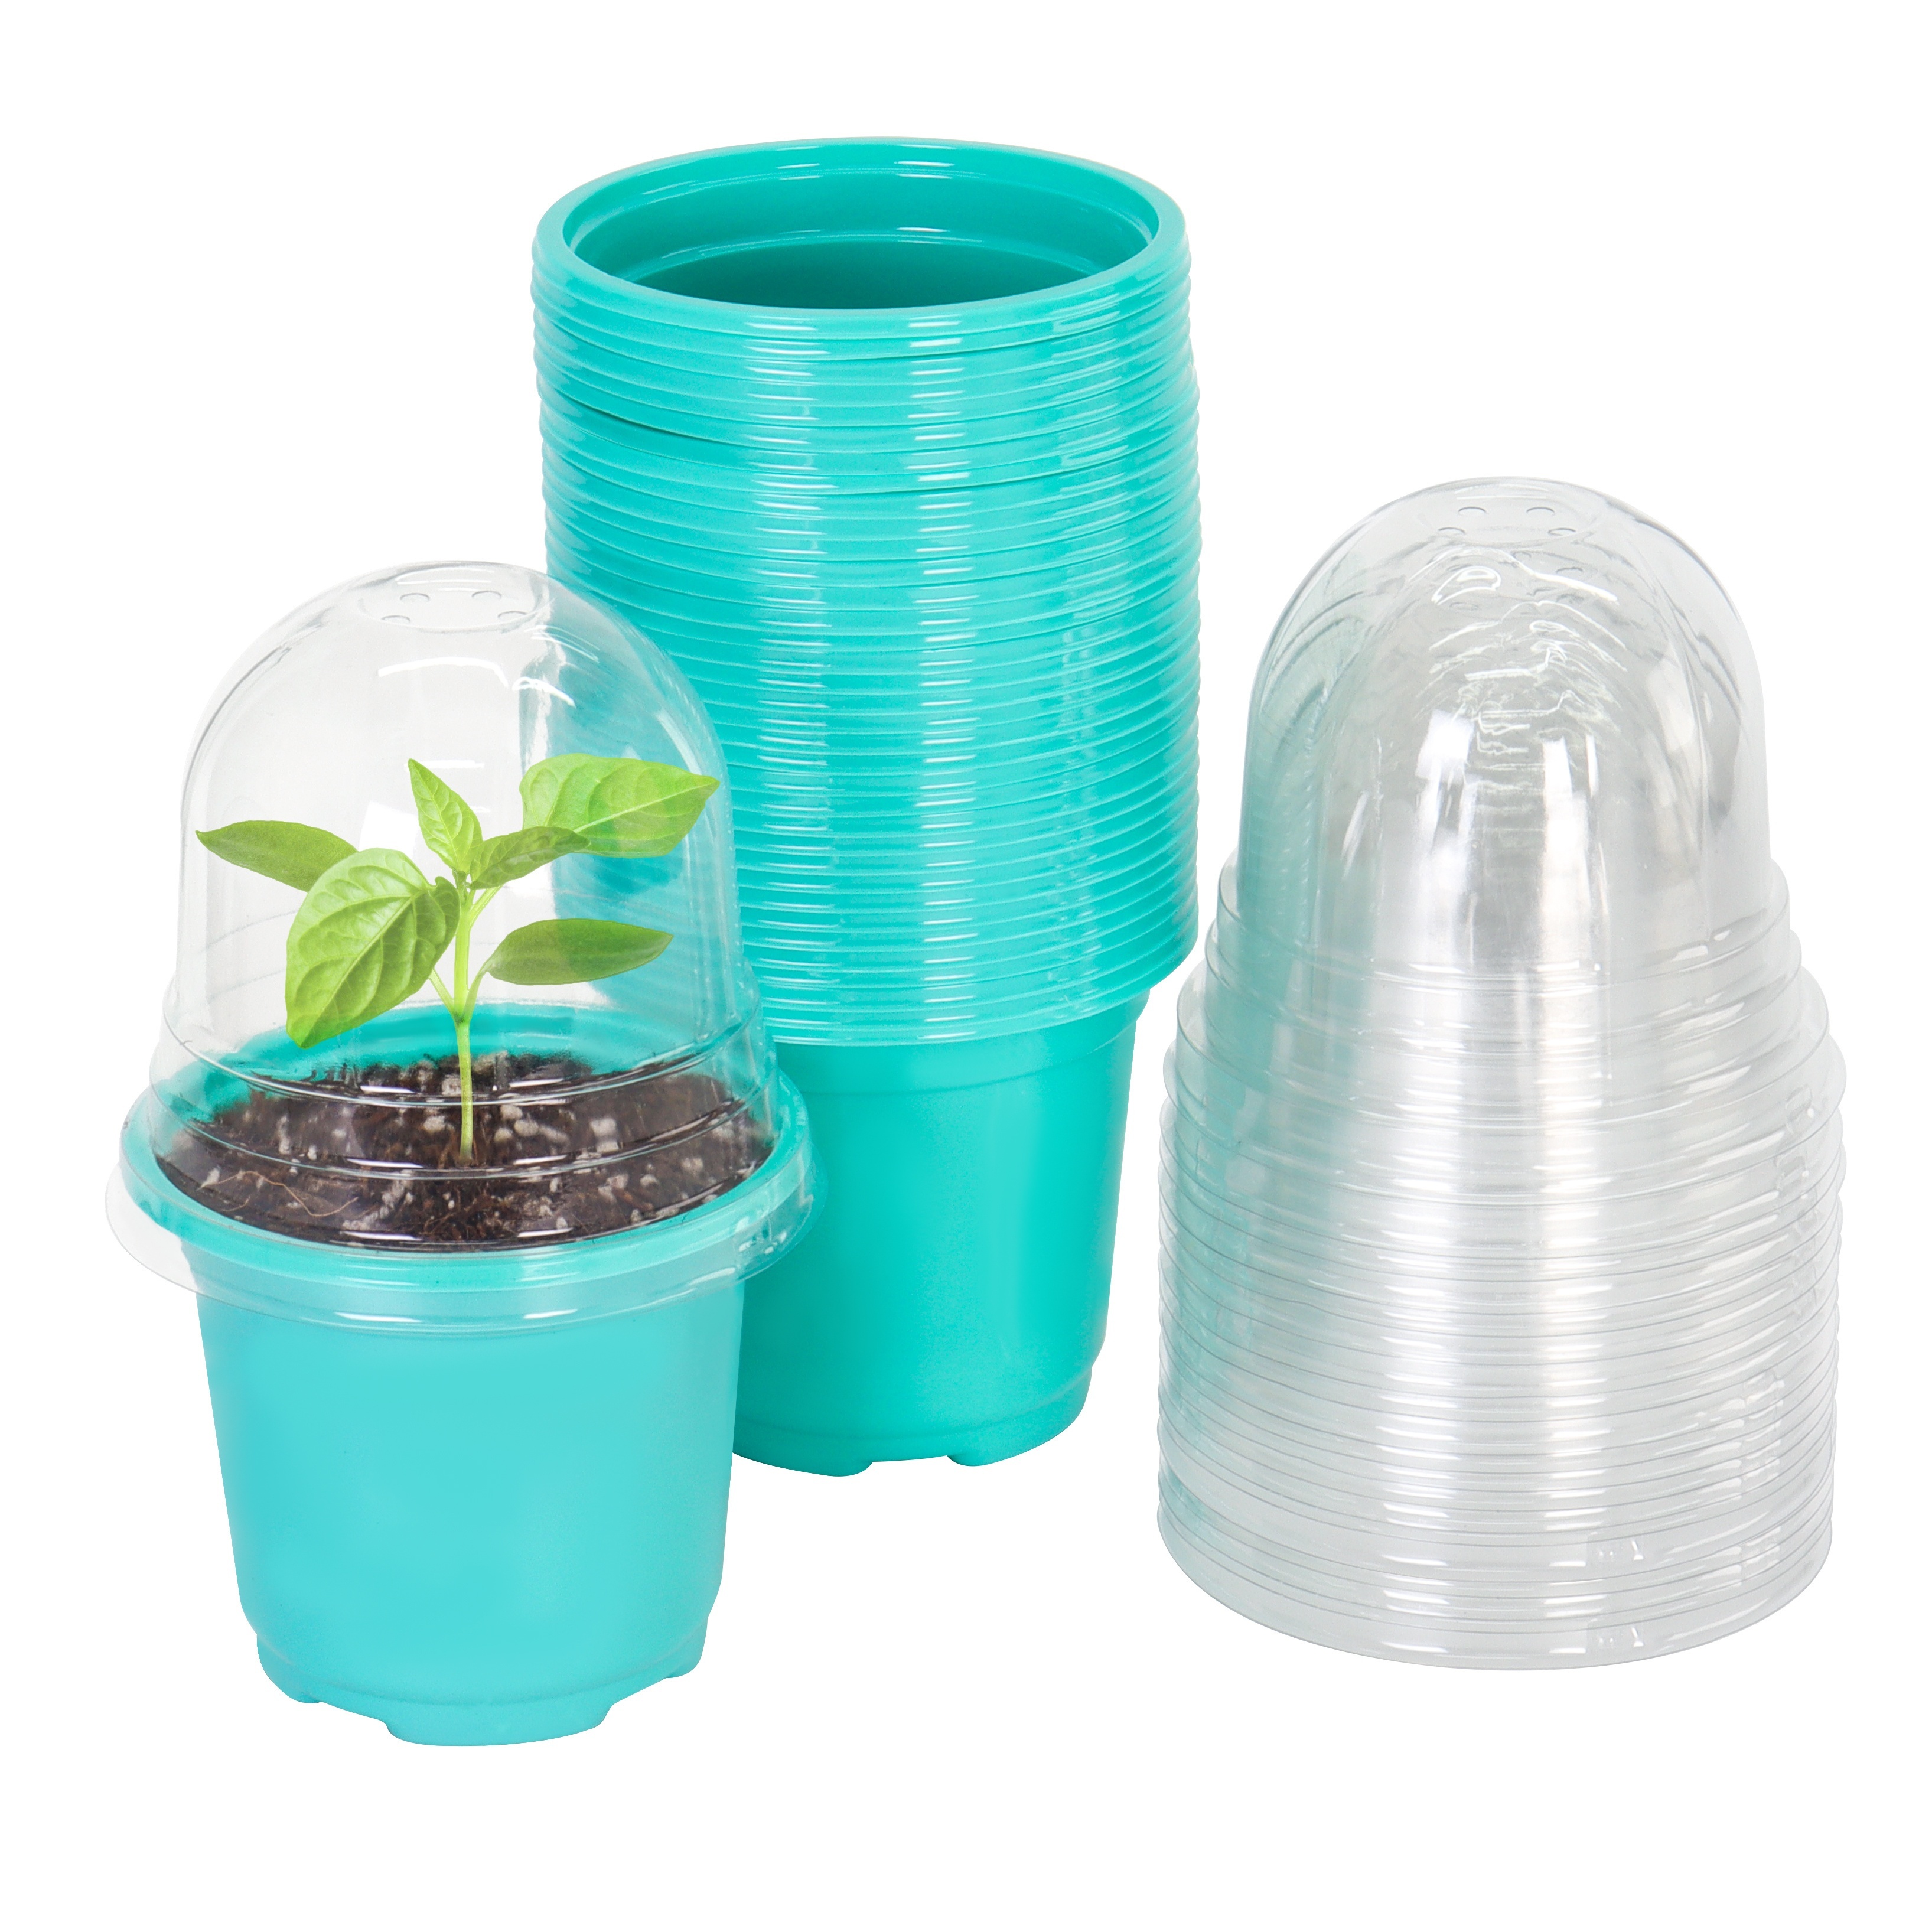 

36sets Plastic Plant Nursery Pot With Humidity Dome, Green Gardening Pot Planting Container Cup, Small Planter Seed Starting Tray, Garden Supplies